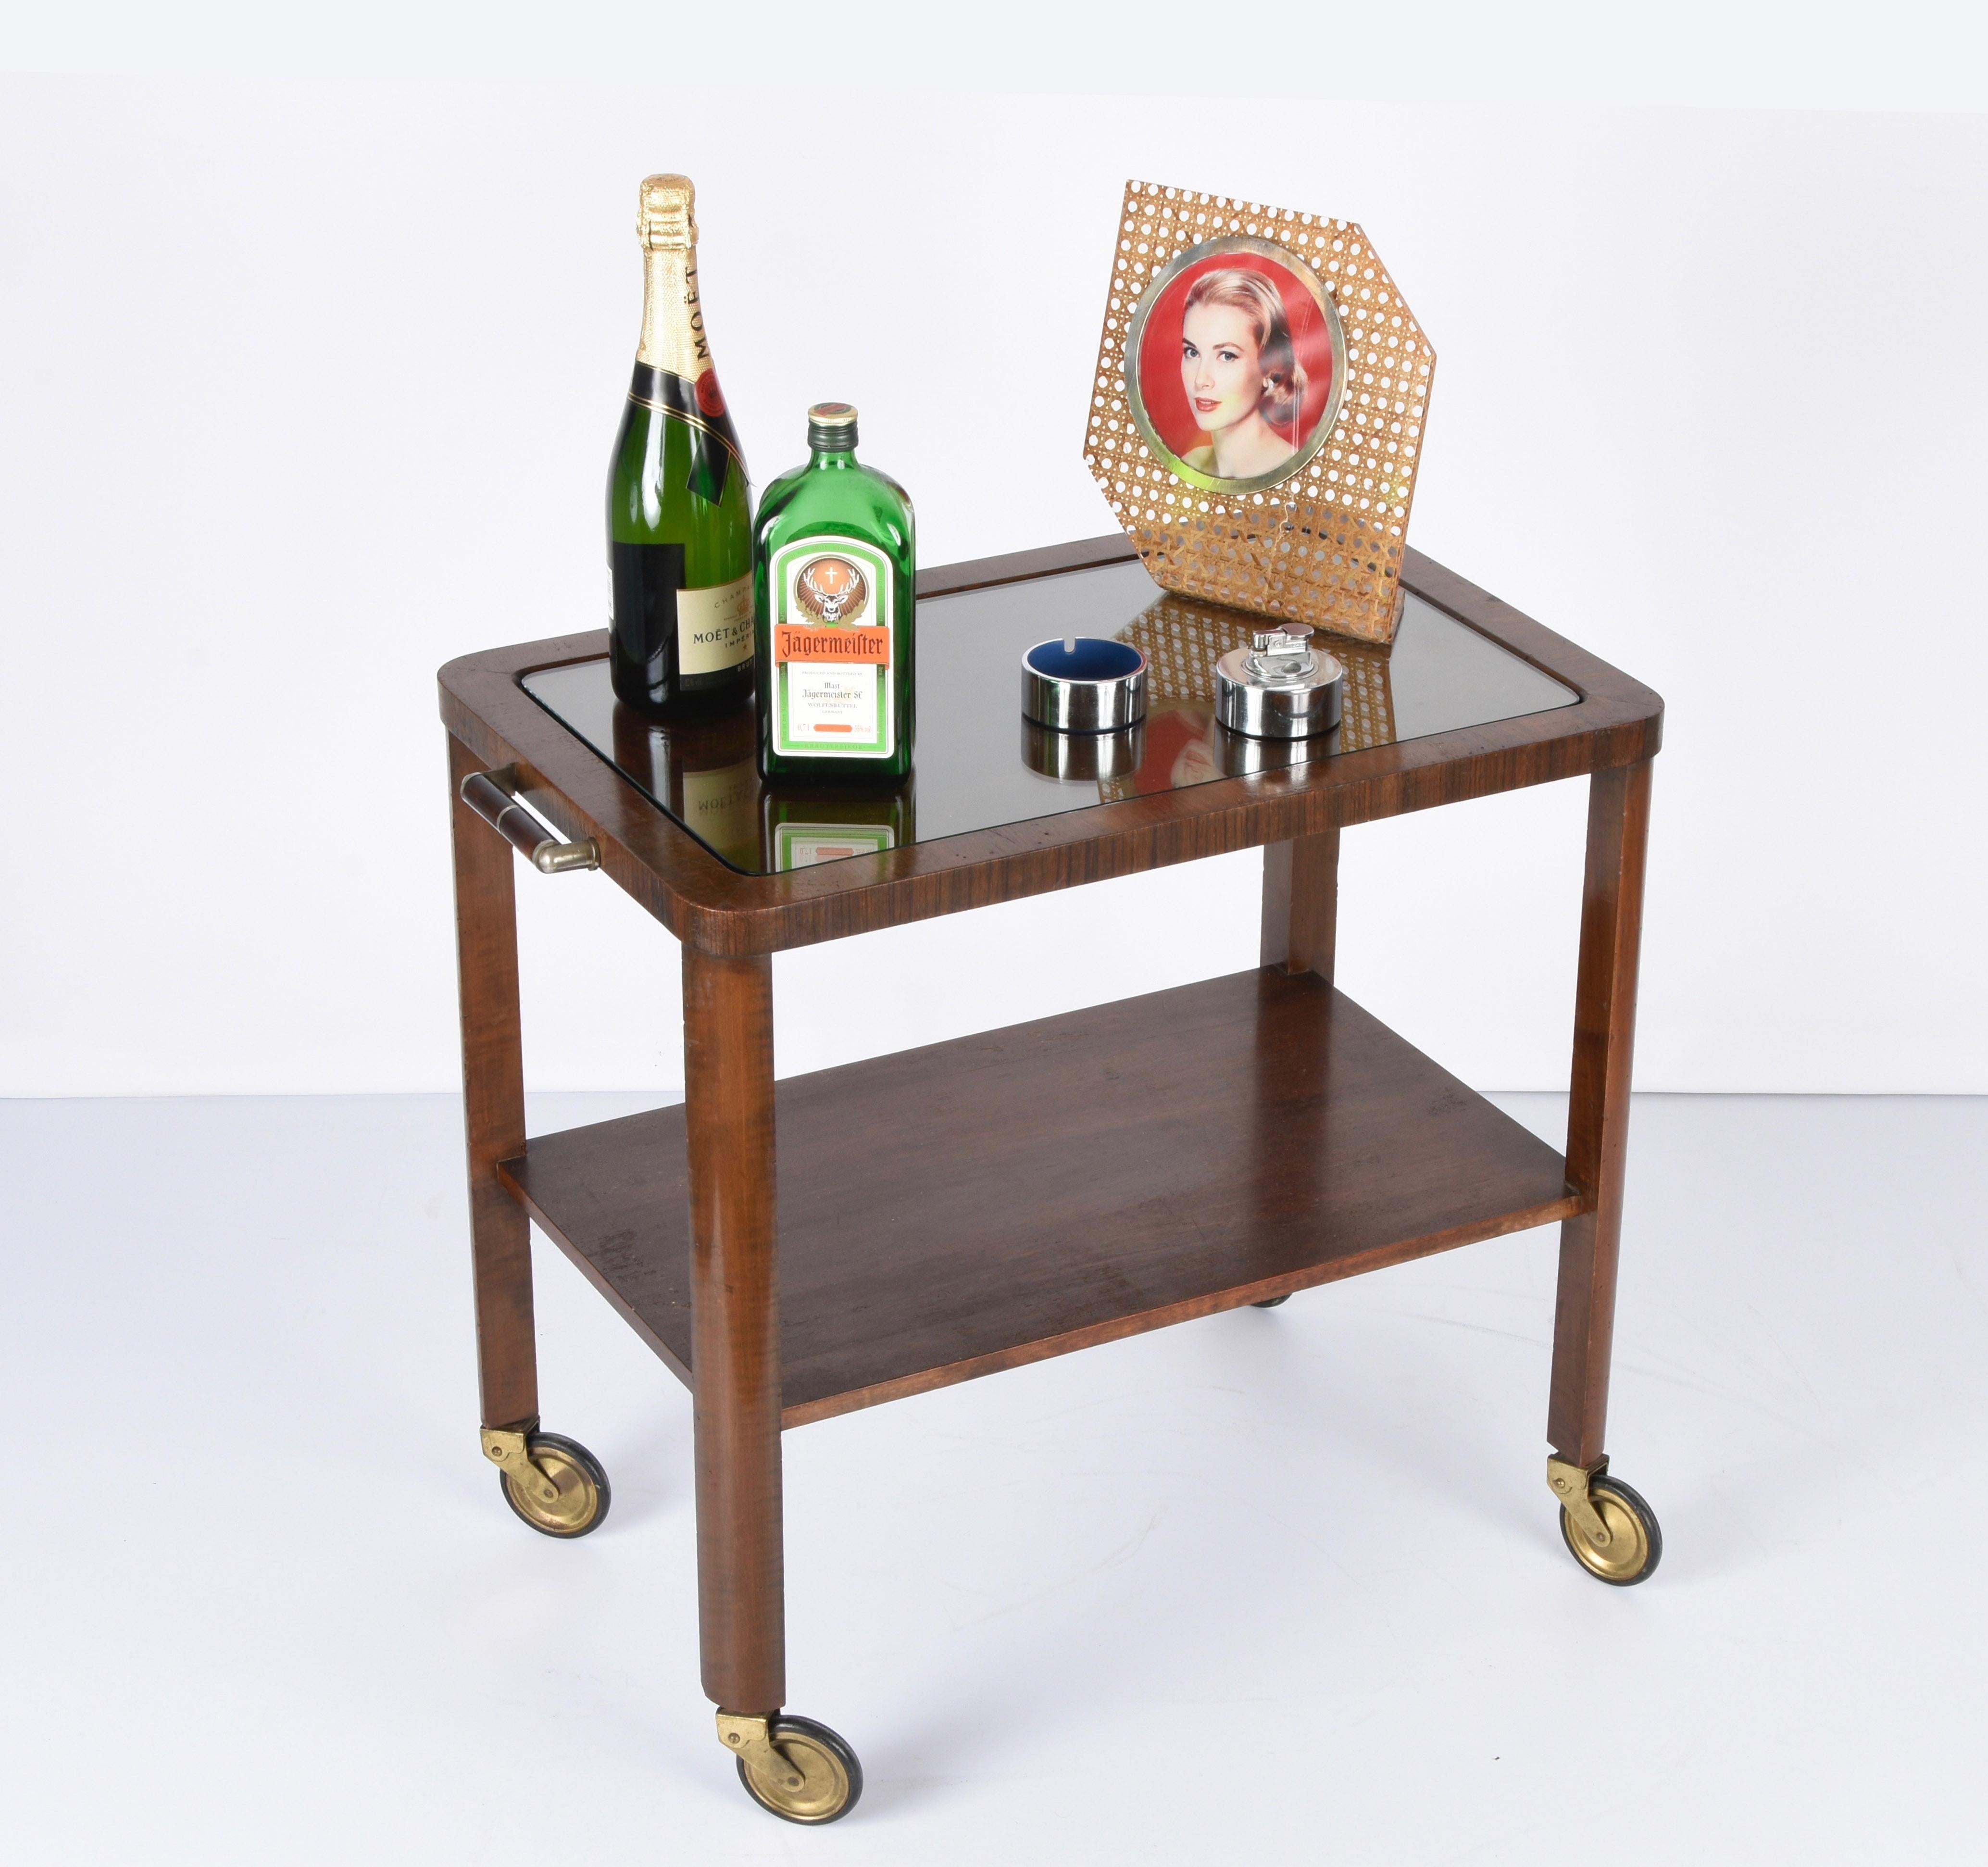 Art Deco Solid Walnut Wood and Glass Two-Levels Italian Trolley Bar Cart, 1940s For Sale 7